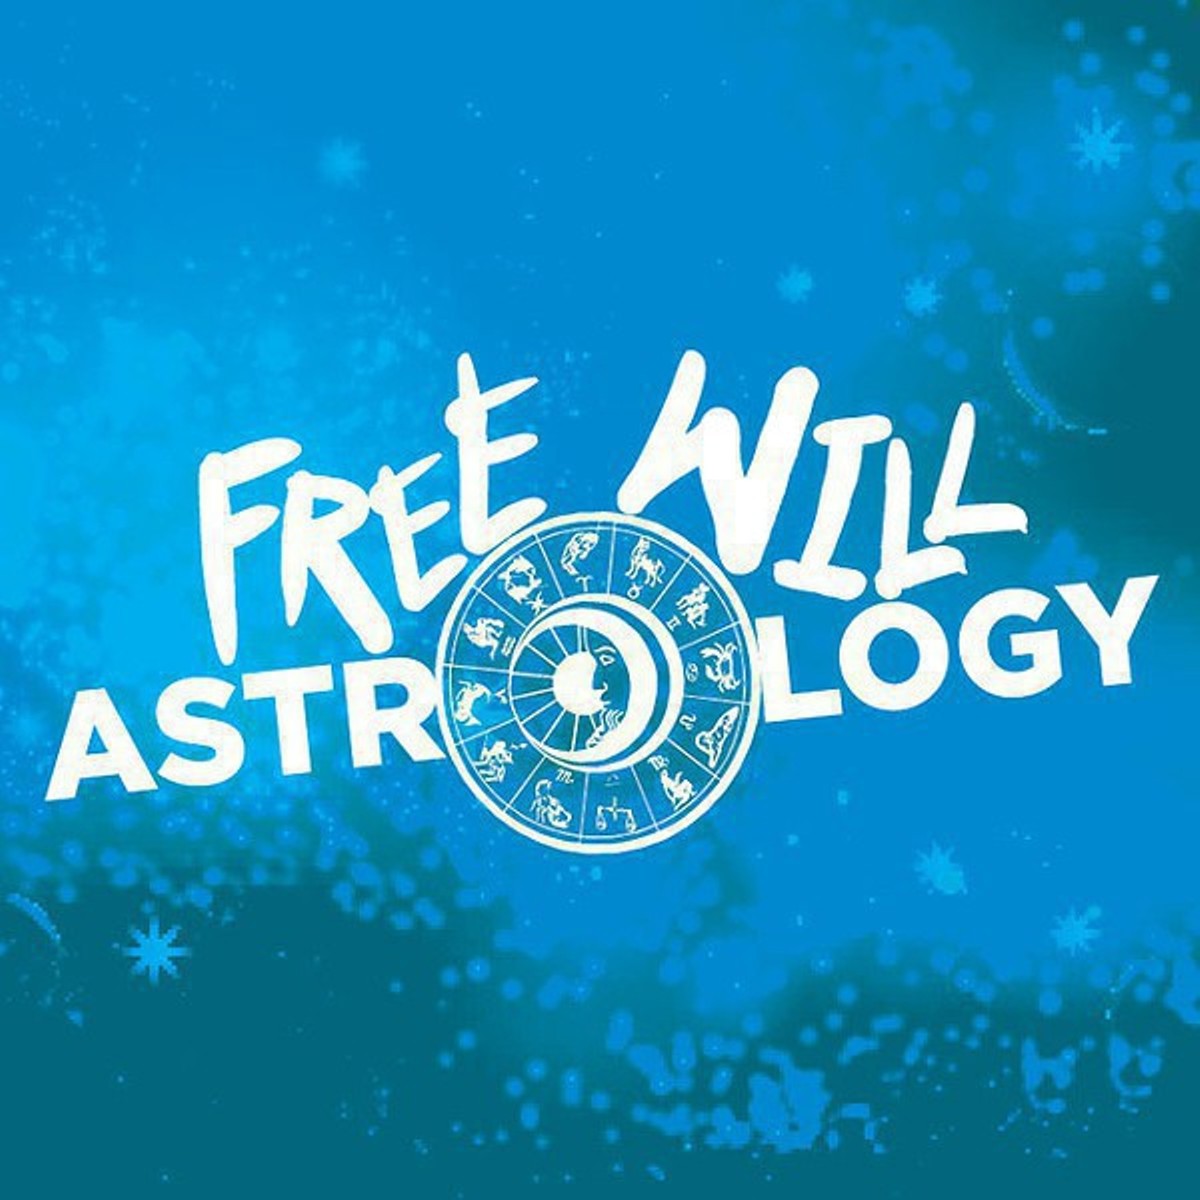 Free Will Astrology (5/18/16)